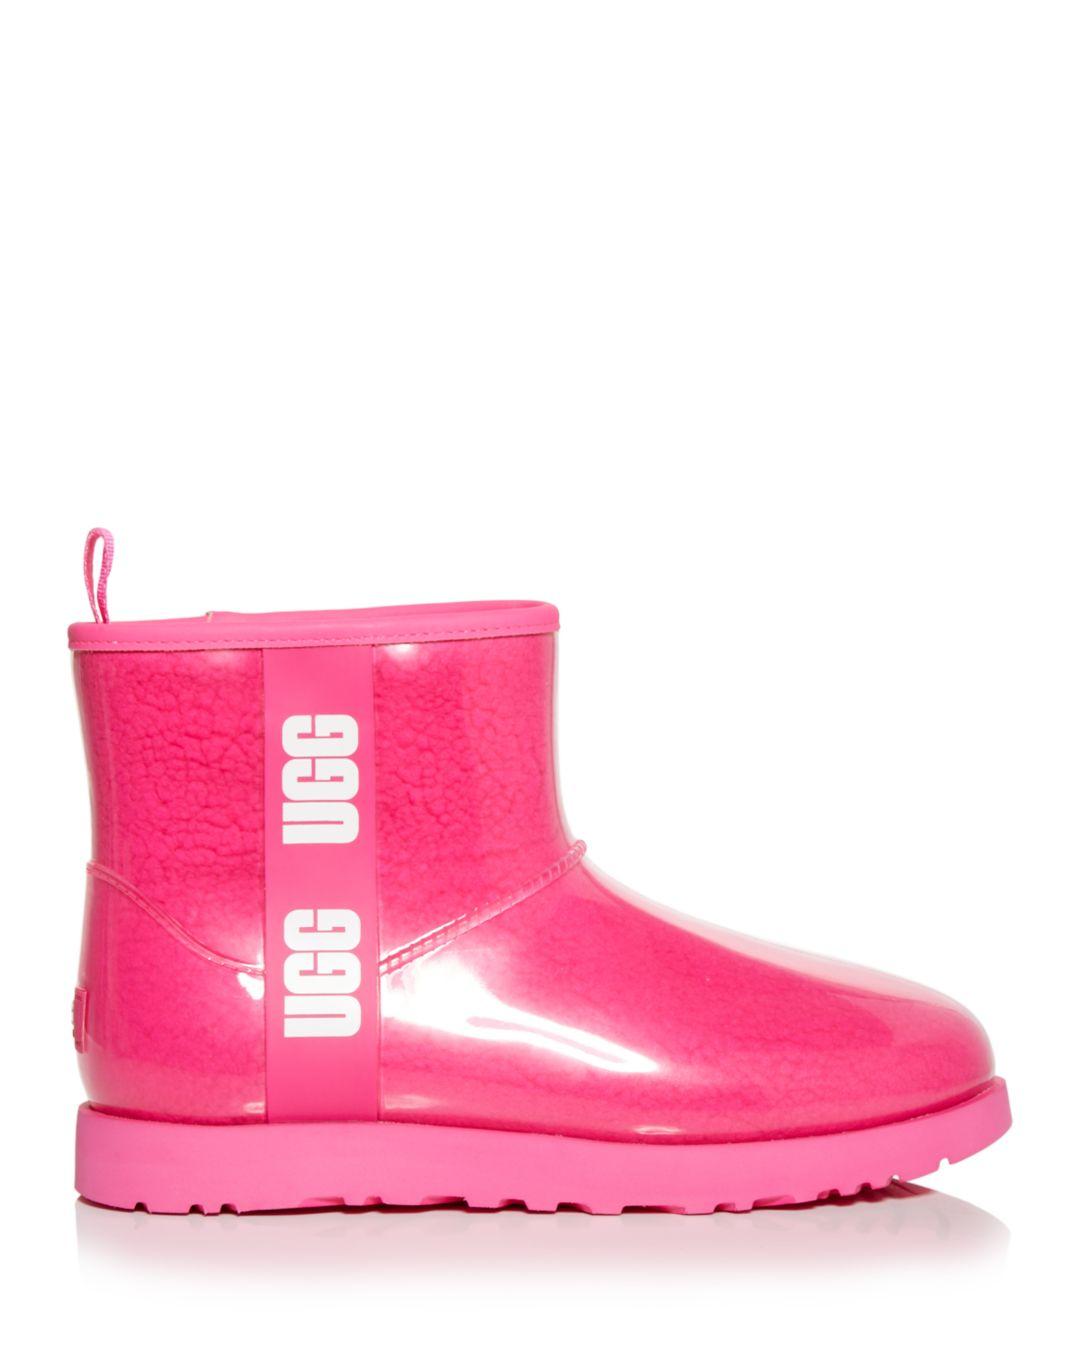 UGG Wool Classic Mini Clear Rain Boots in Hot Pink (Pink) - Save 